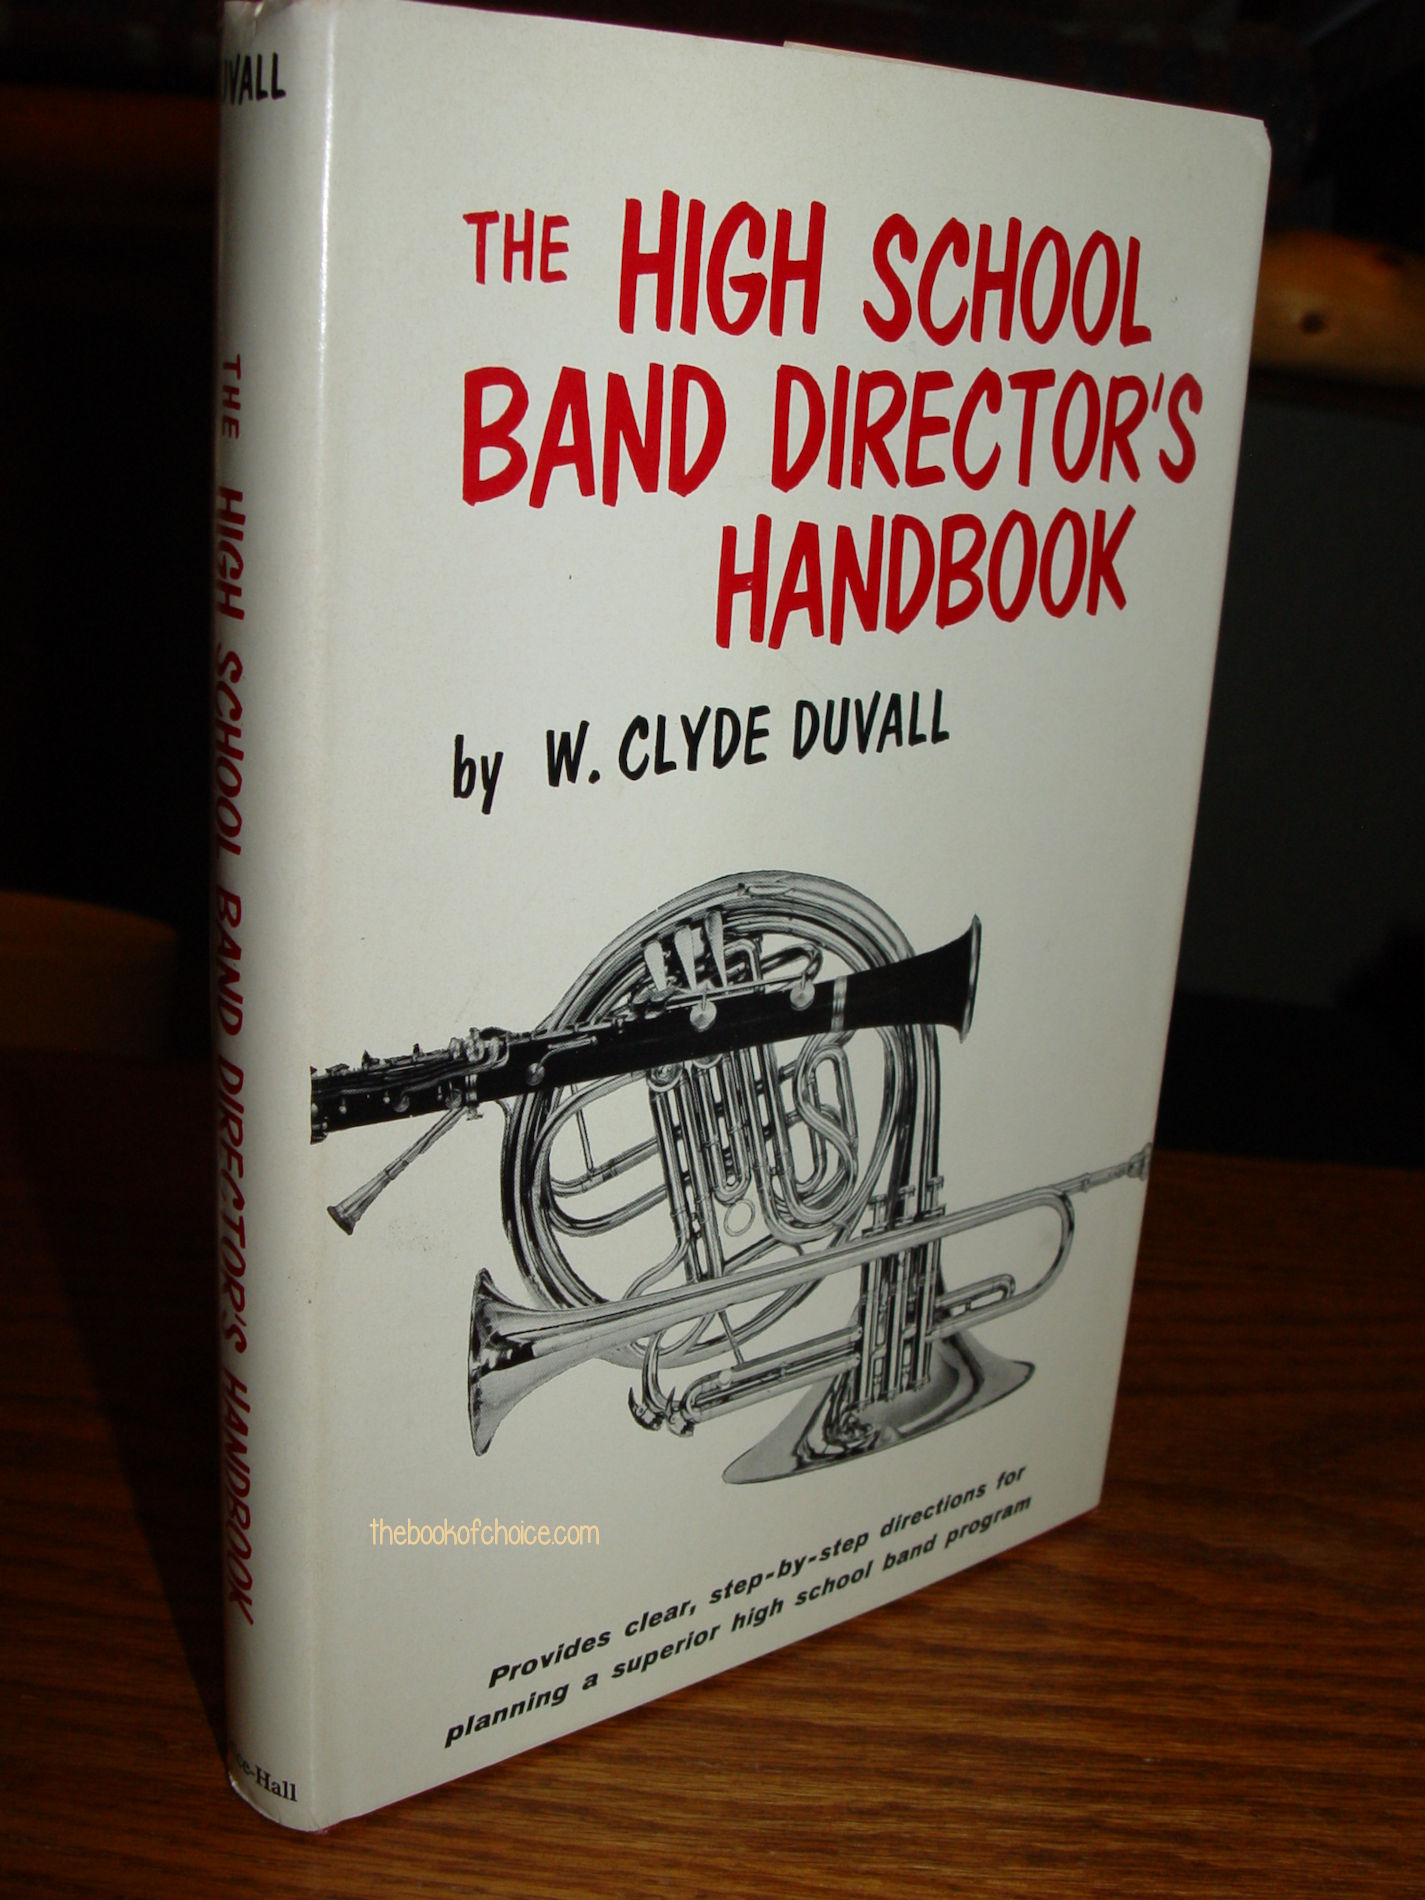 The High School Band Director's Handbook
                        1964 by W. Clyde Duvall